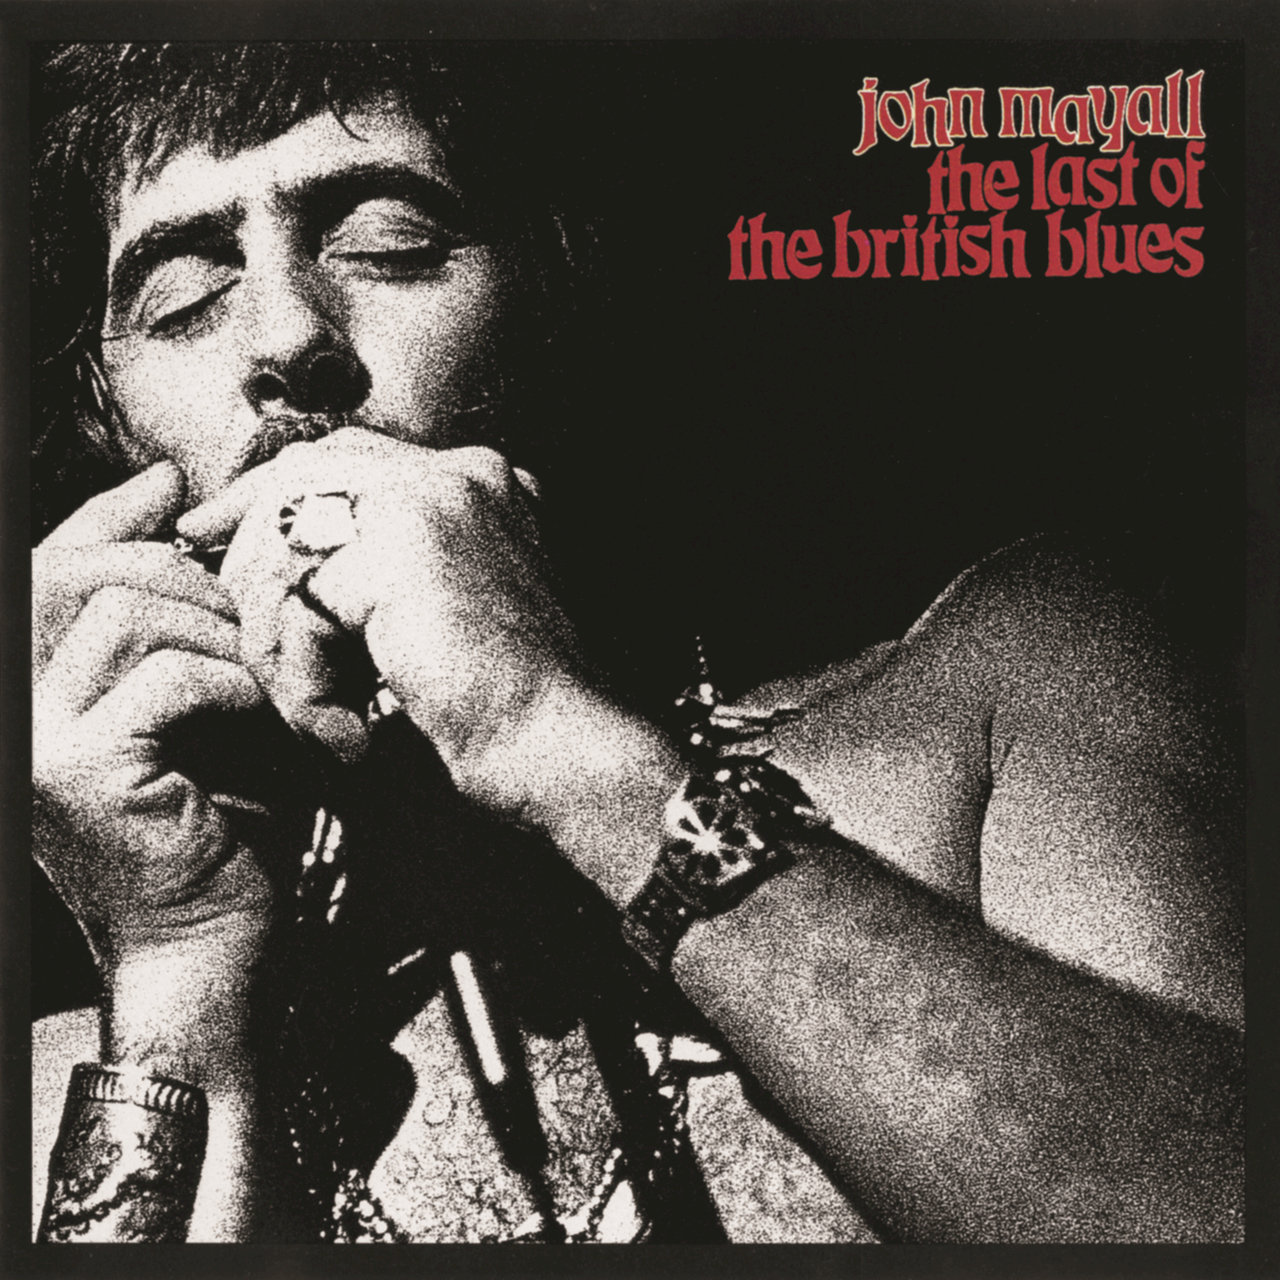 The Last Of The British Blues (Live) [1978]